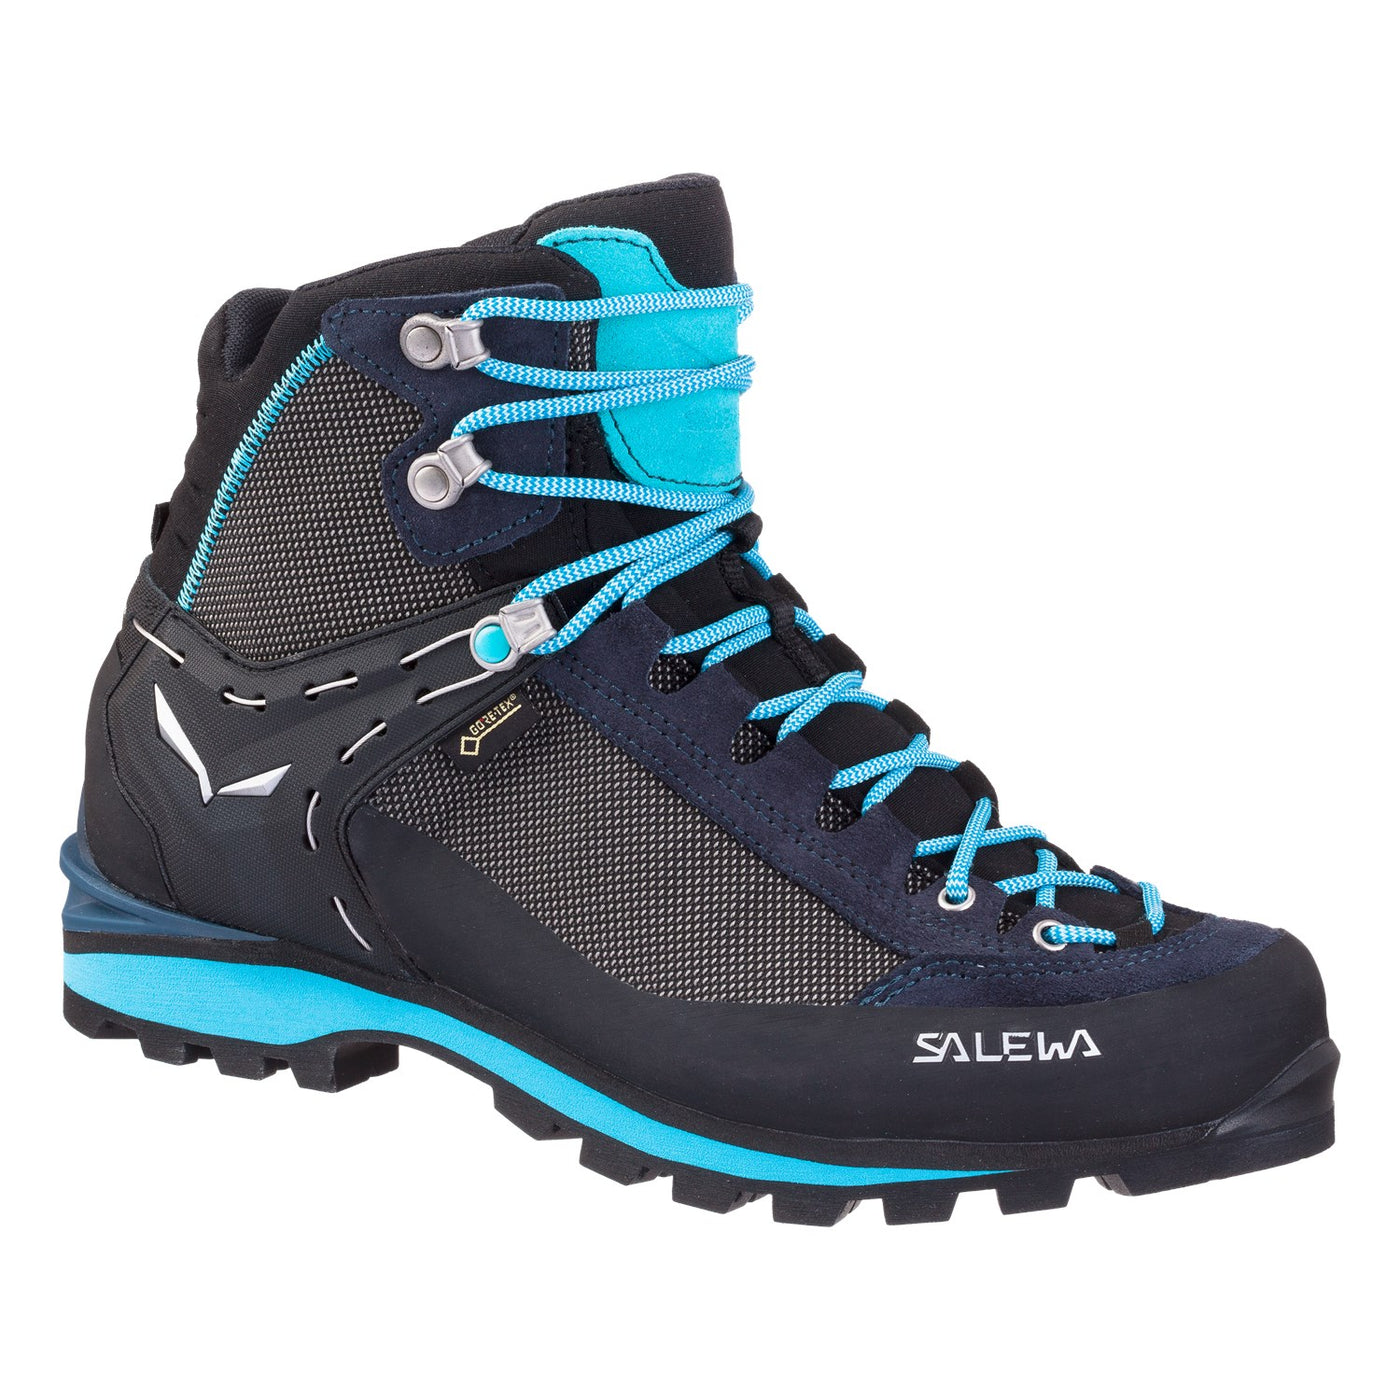 Salewa Crow Gore-Tex Womens | Mountaineering and Hiking Boots | NZ